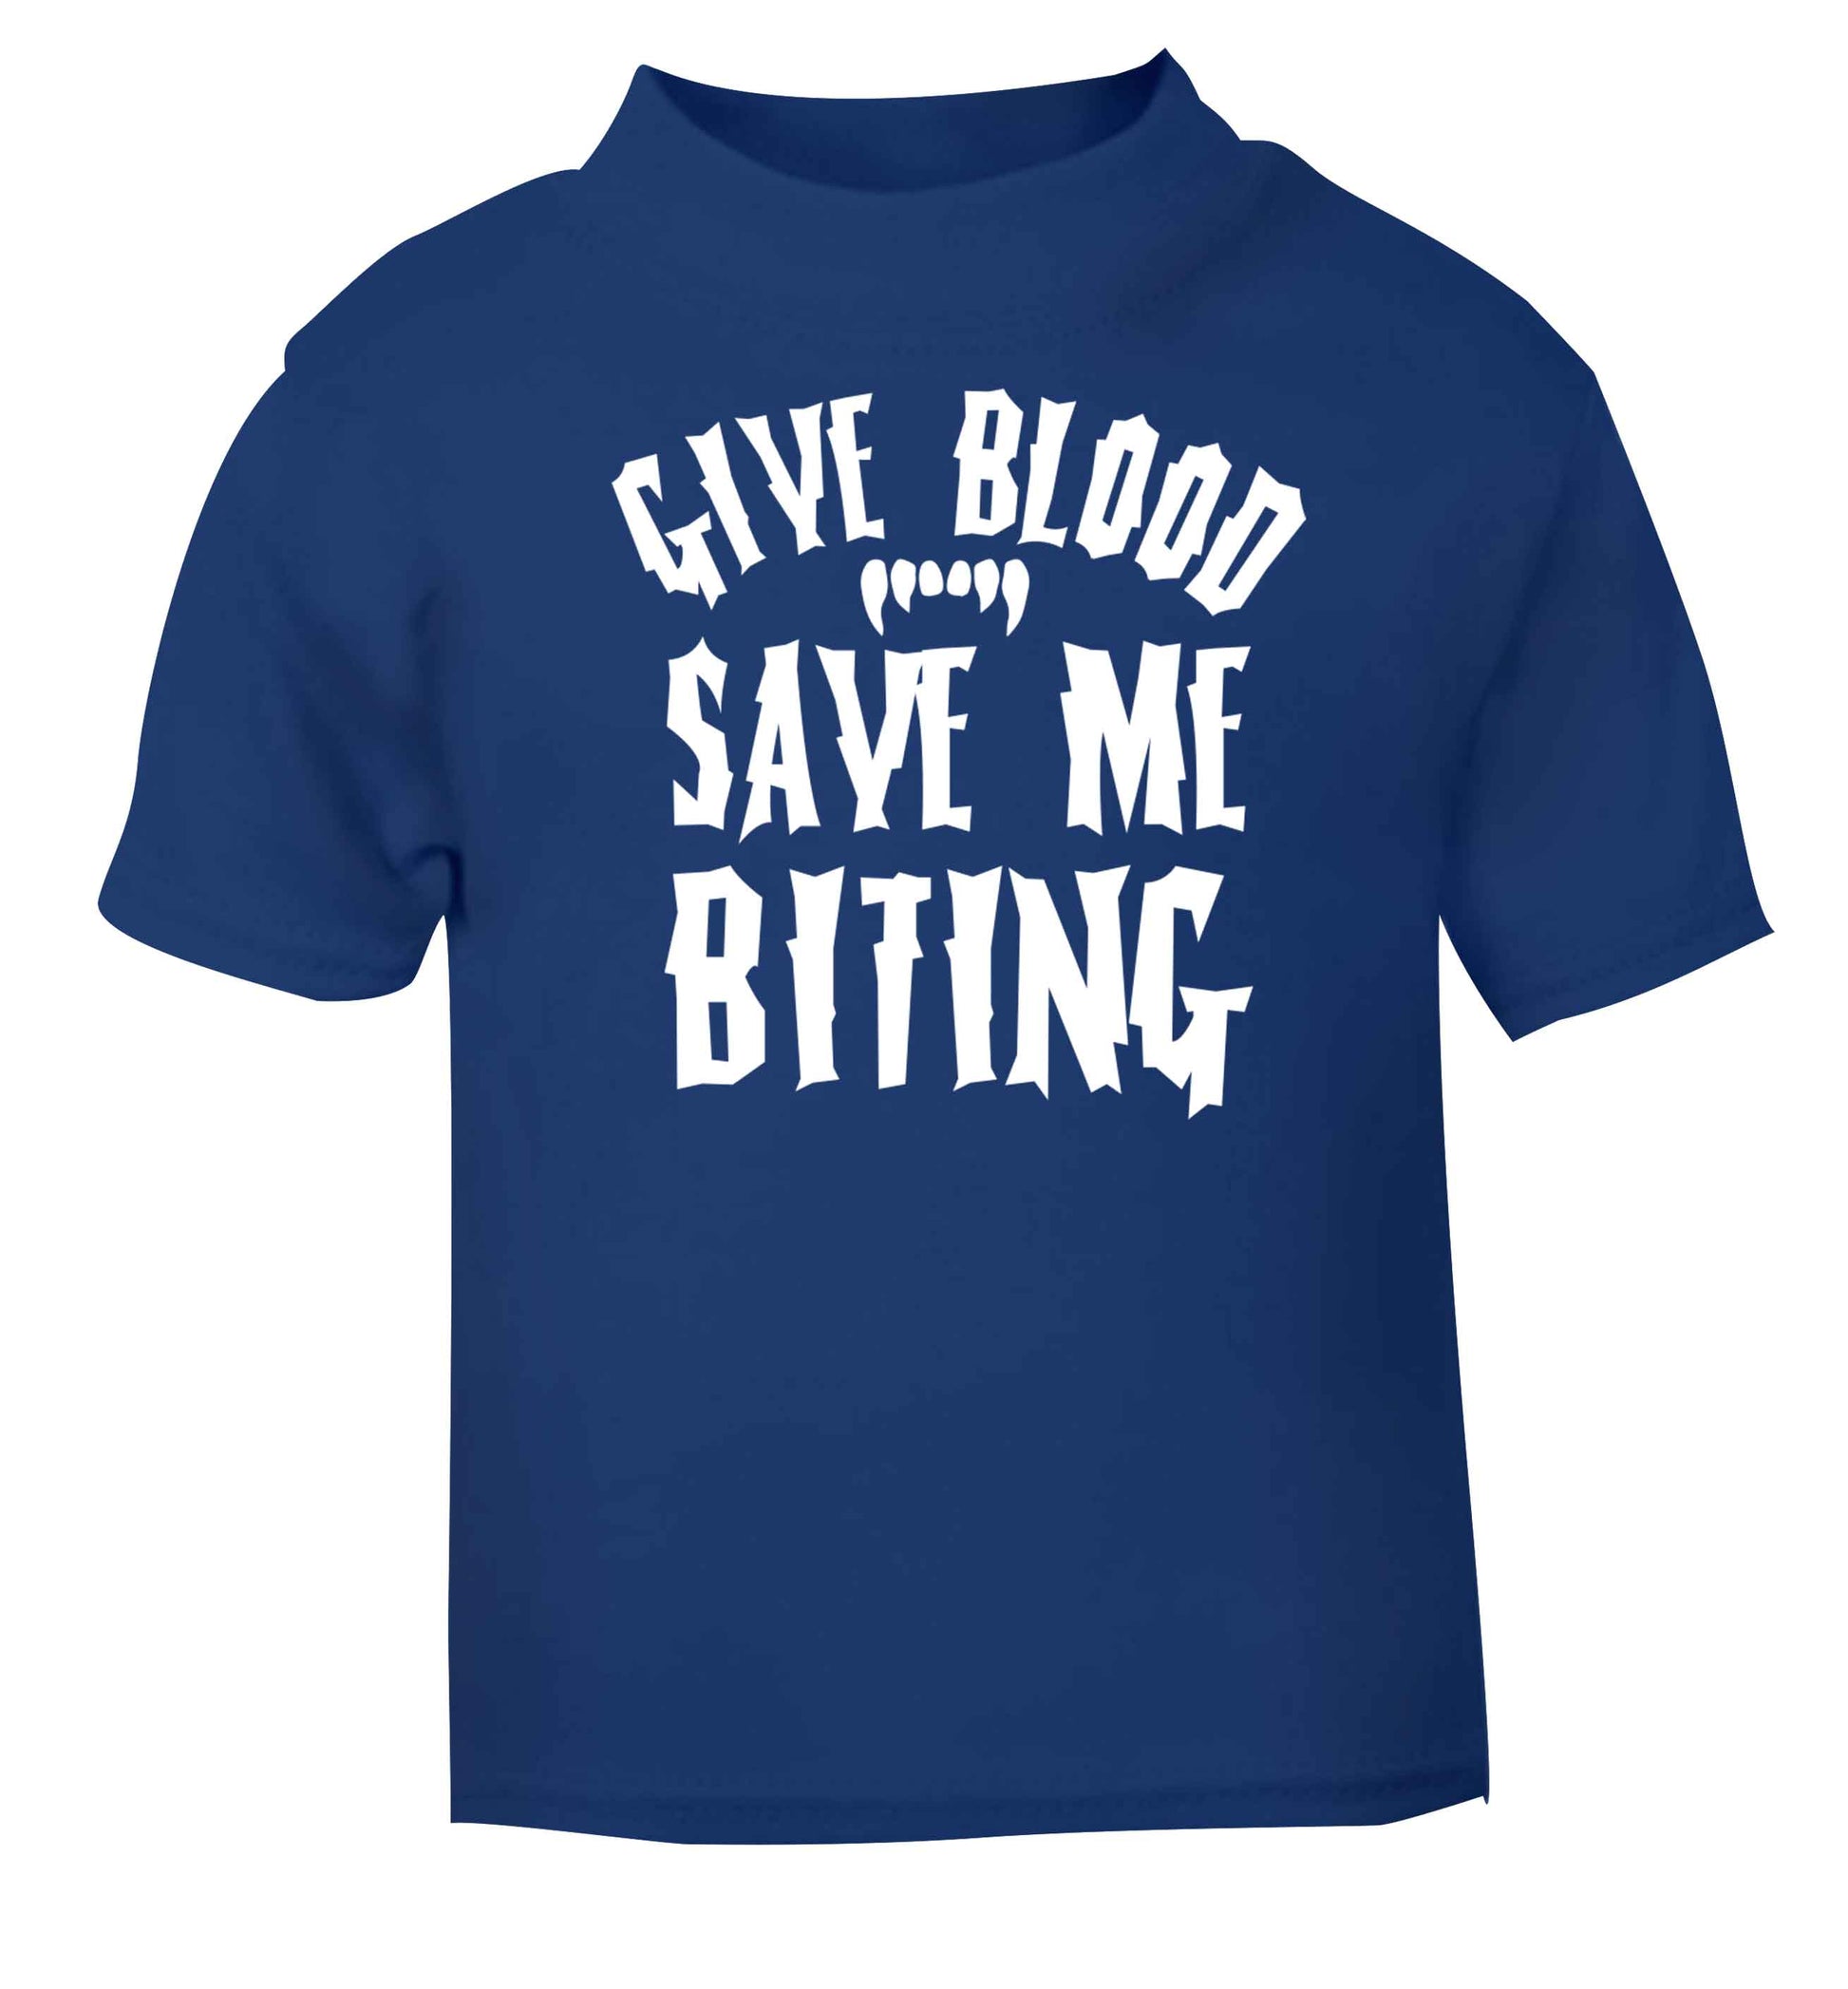 Give blood save me biting blue baby toddler Tshirt 2 Years